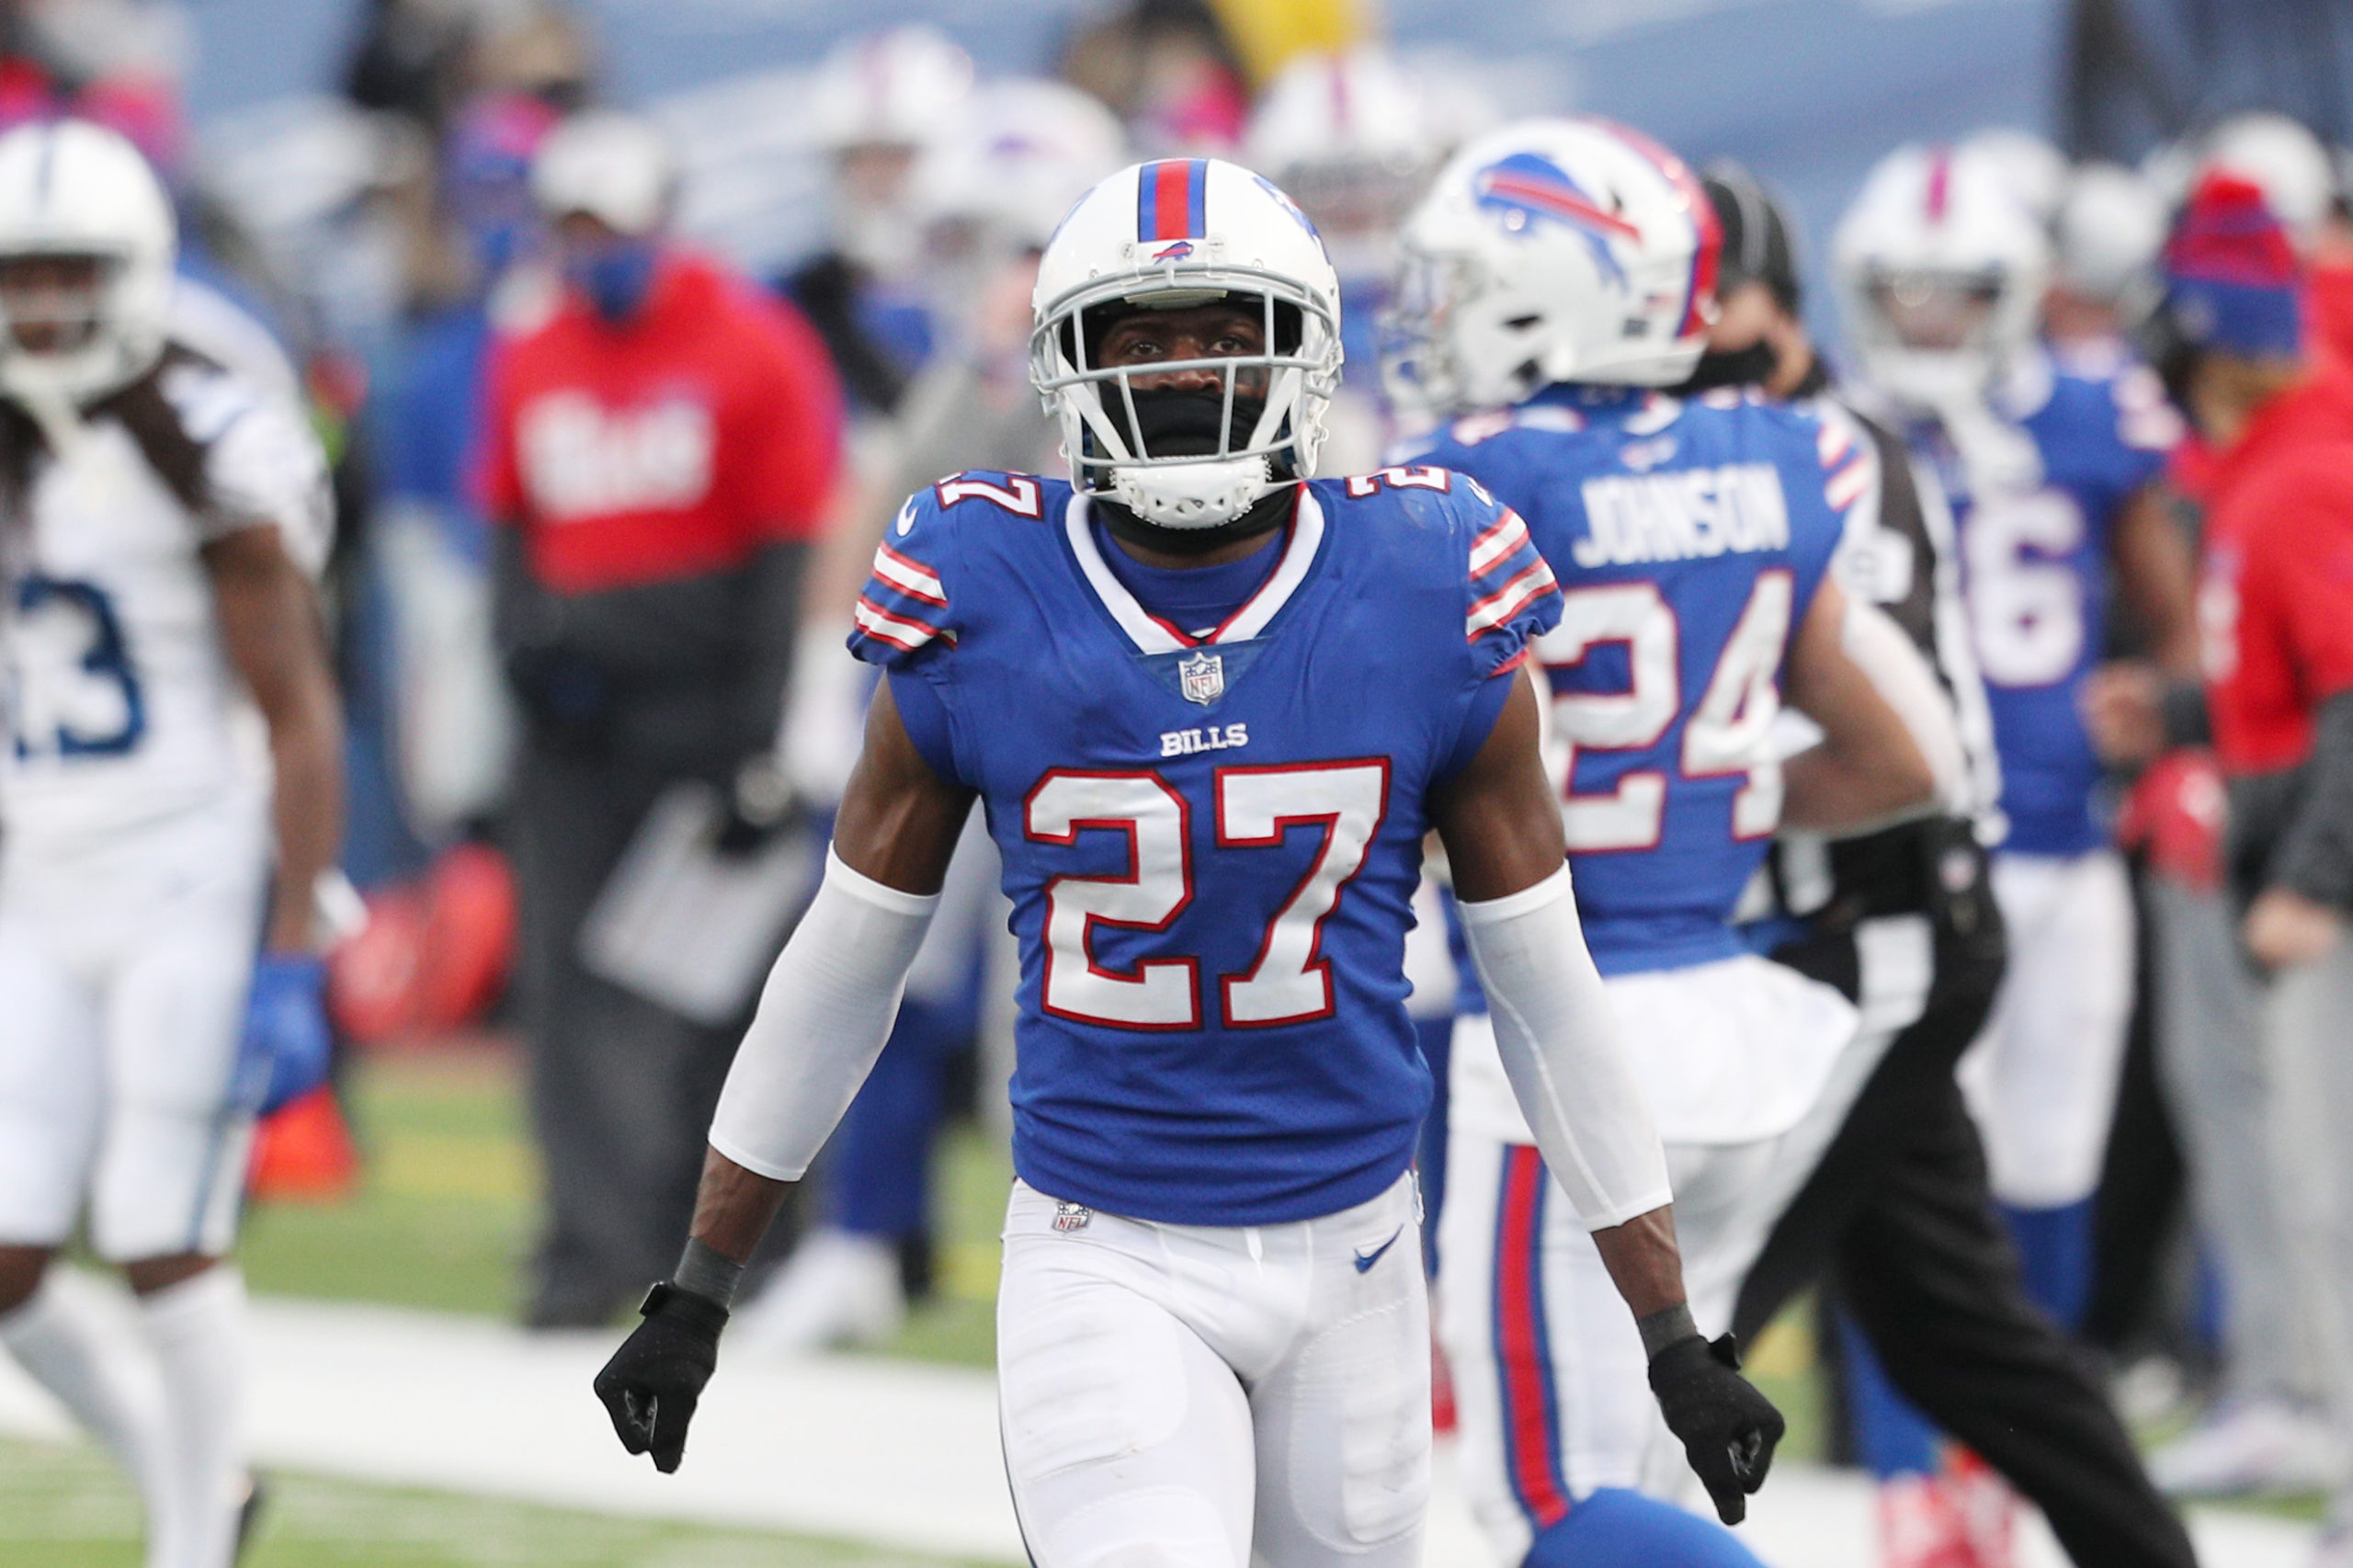 ORCHARD PARK, NEW YORK - JANUARY 09: Tre'Davious White #27 of the Buffalo Bills celebrates after breaking up a pass during the second half of the AFC Wild Card playoff game against the Indianapolis Colts at Bills Stadium on January 09, 2021 in Orchard Park, New York. Bryan M. Bennett/Getty Images